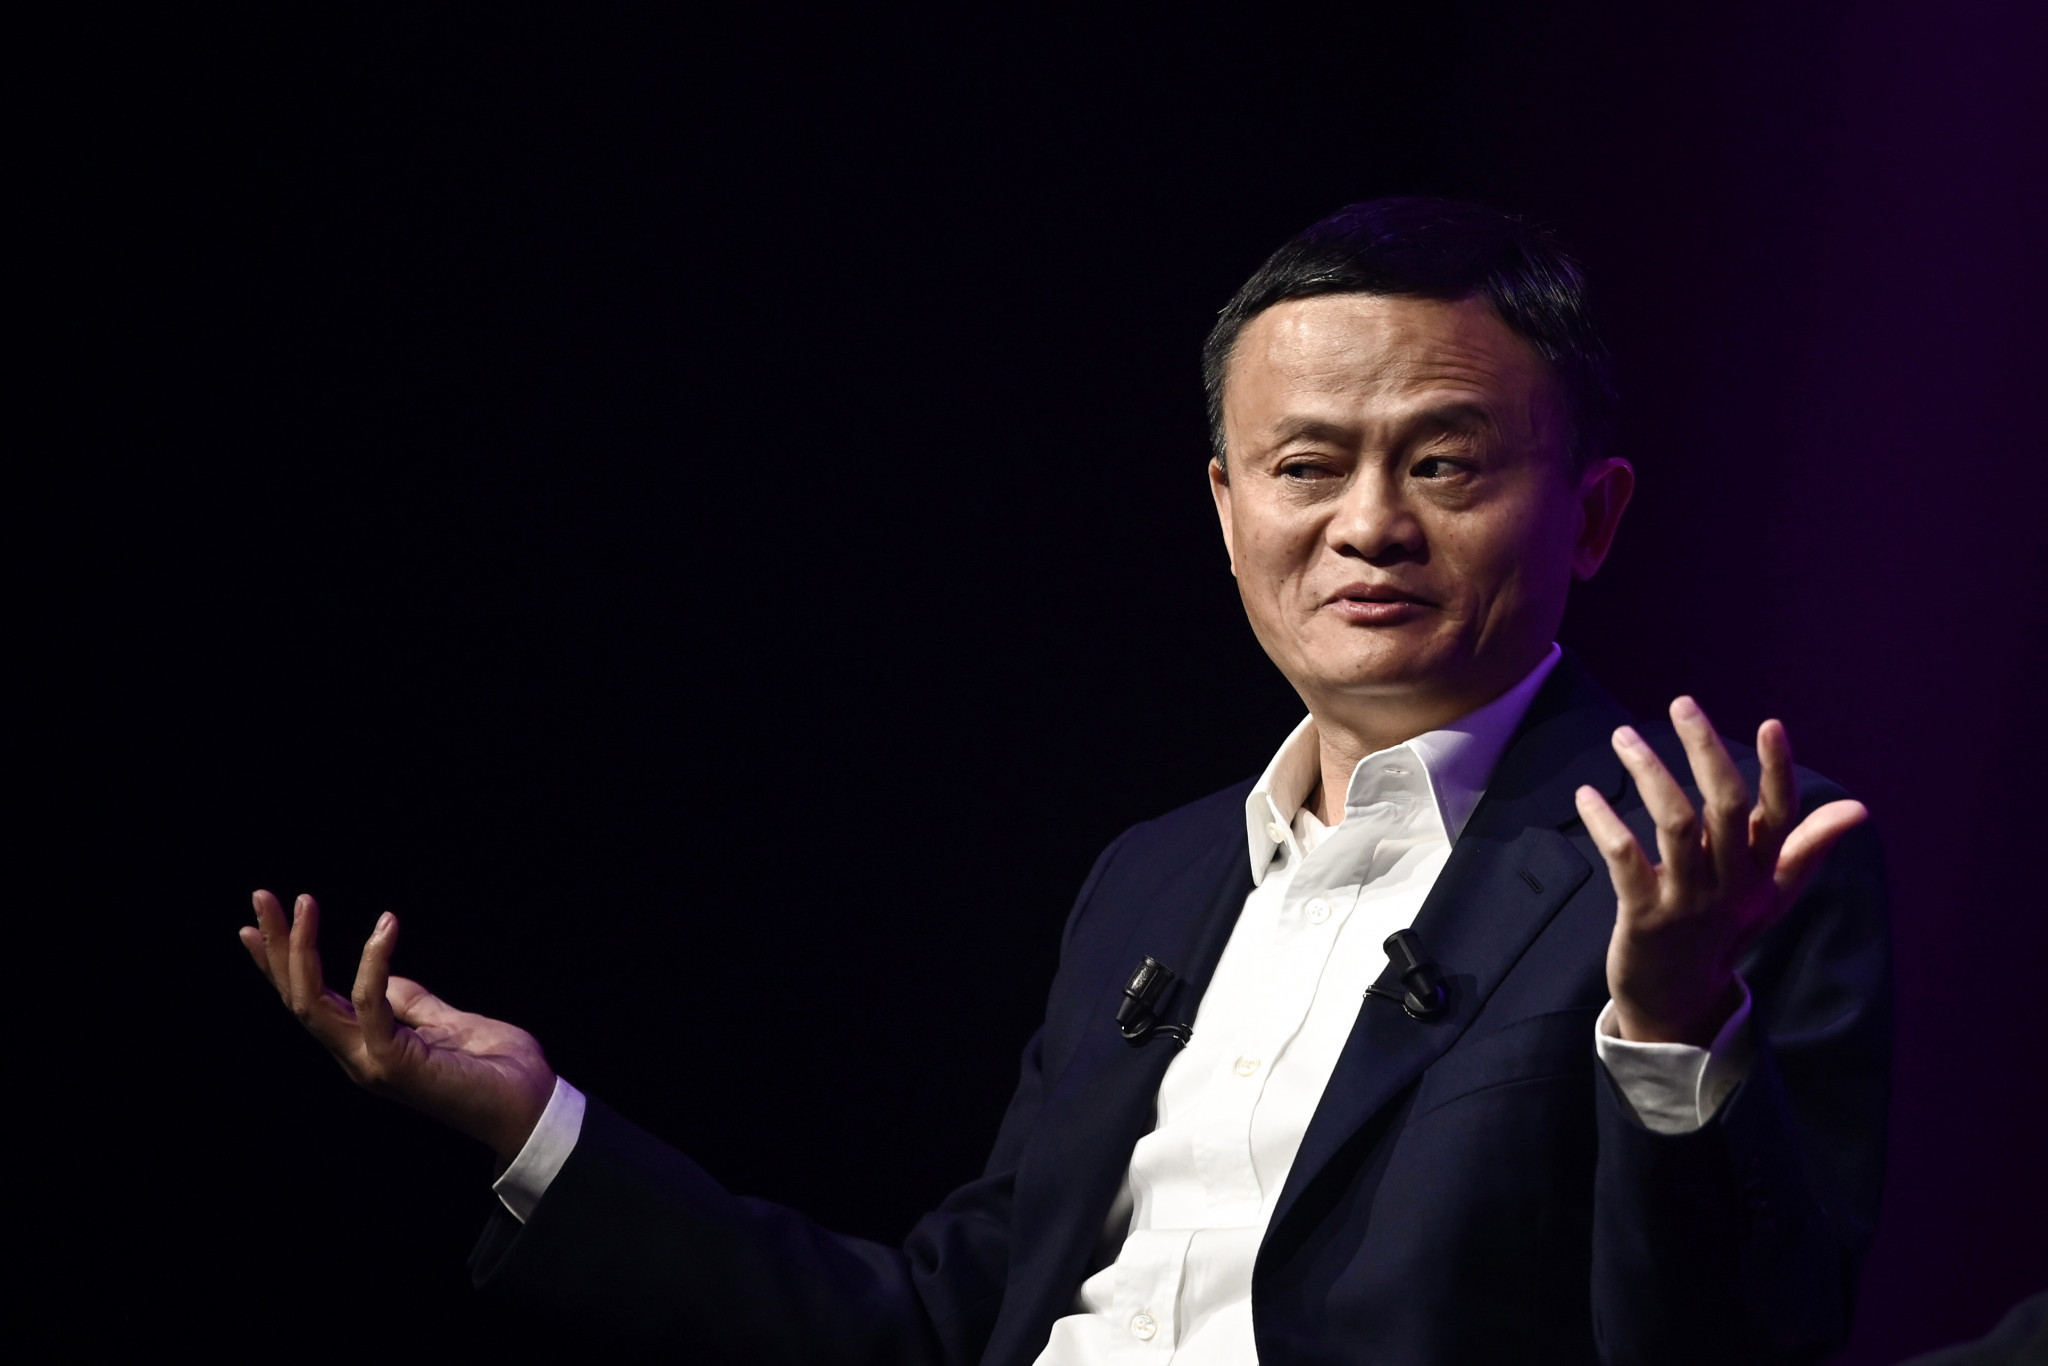 Ant Group, a cloud computing company founded by Jack Ma, was set to make capital markets history before the listing was unexpectedly suspended ©Getty Images